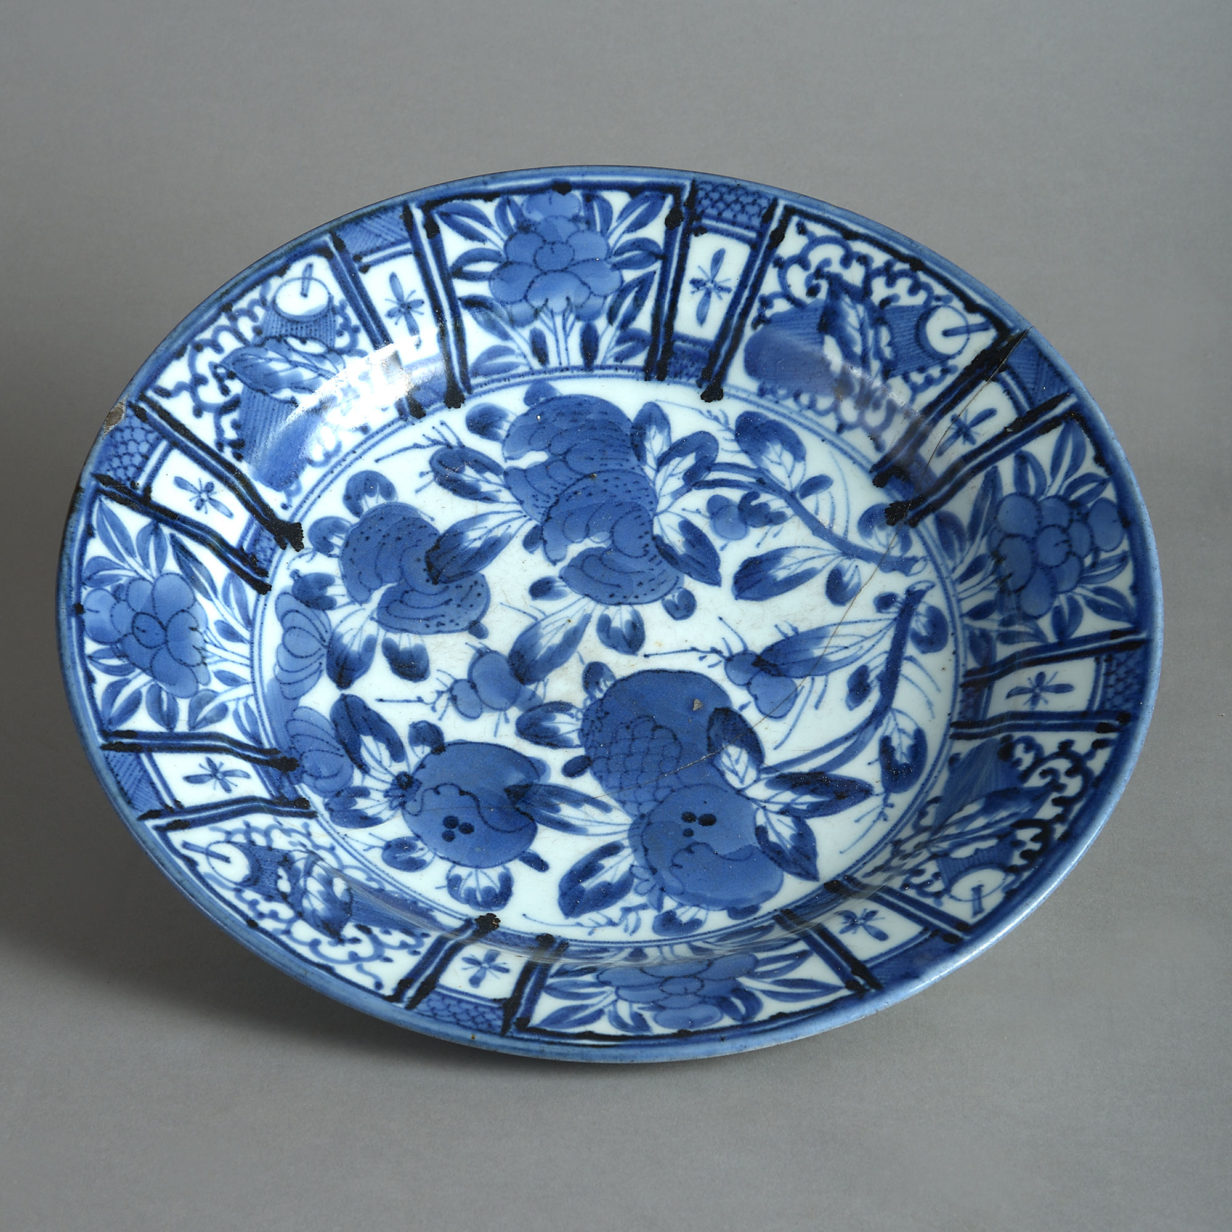 17th century blue and white porcelain charger